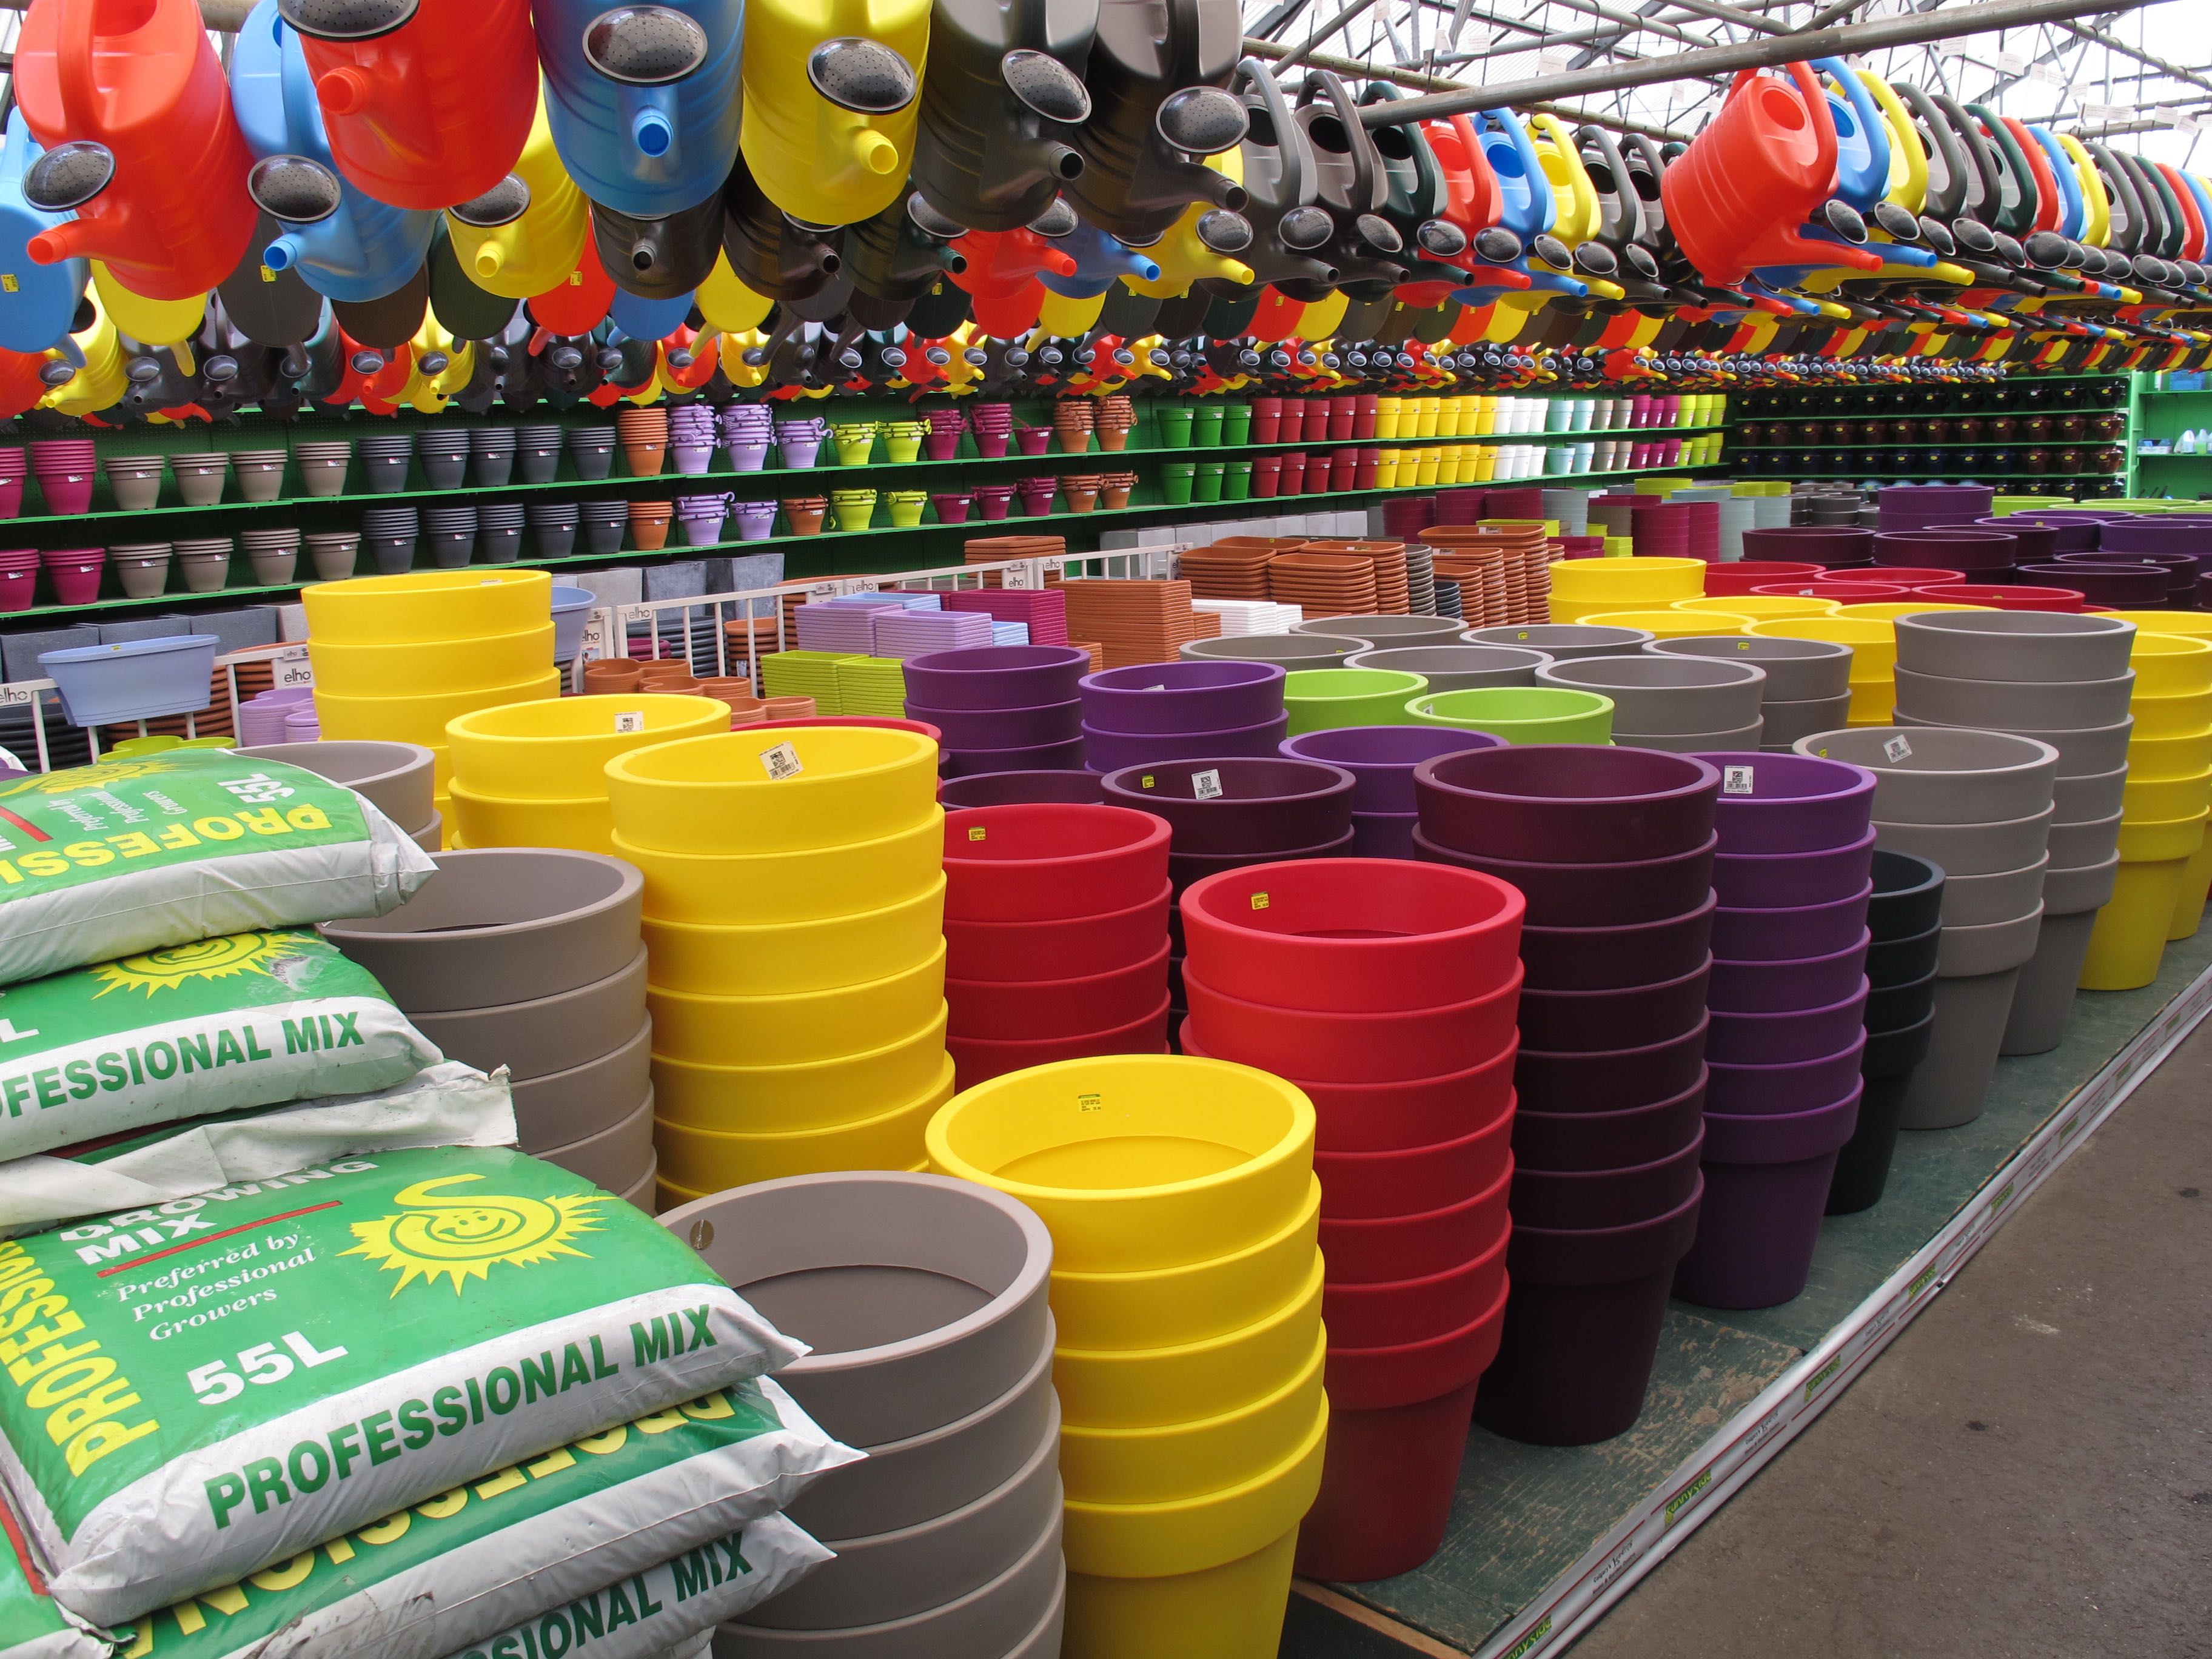 Sea of colour with Sunnyside containers